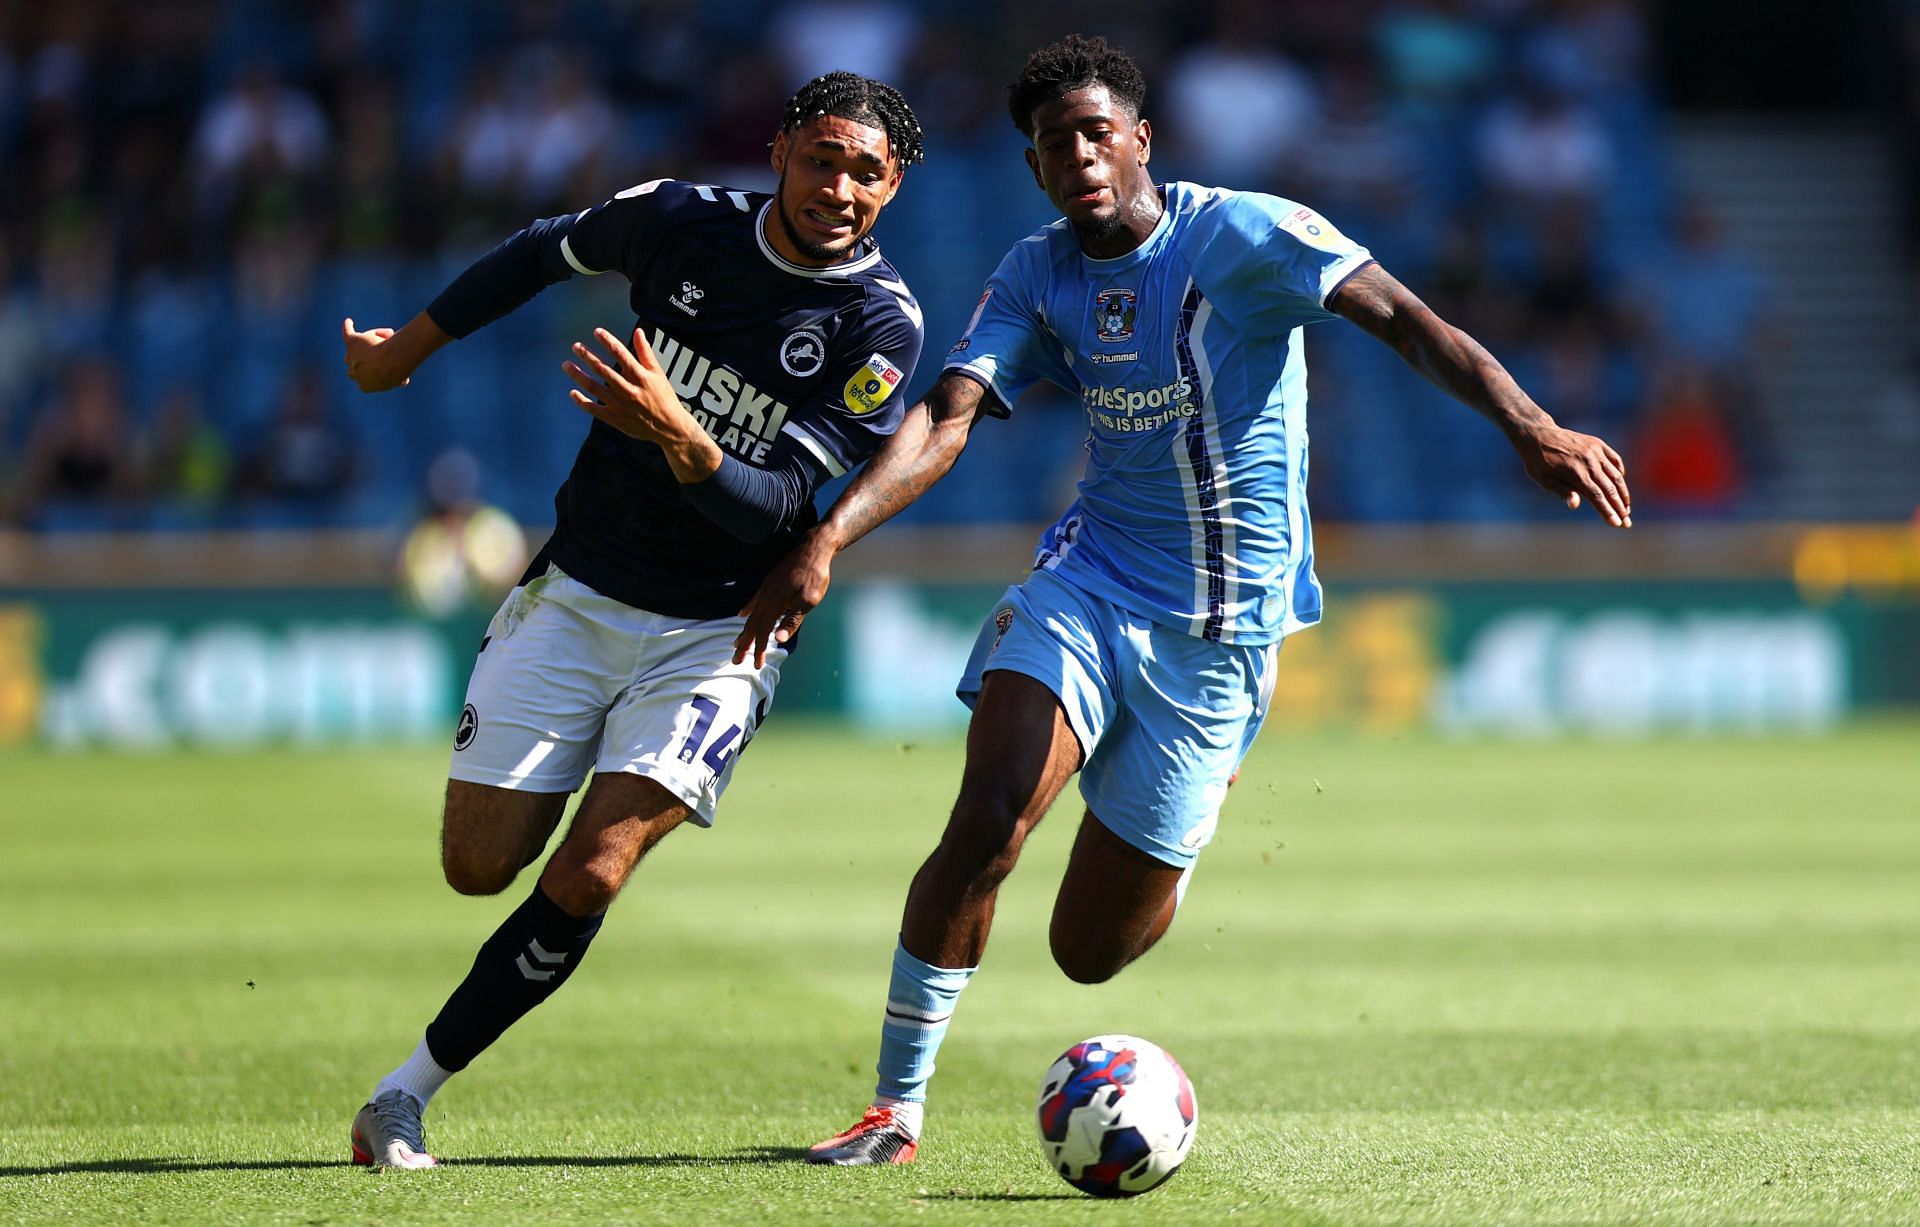 Millwall vs Coventry City Prediction and Betting Tips